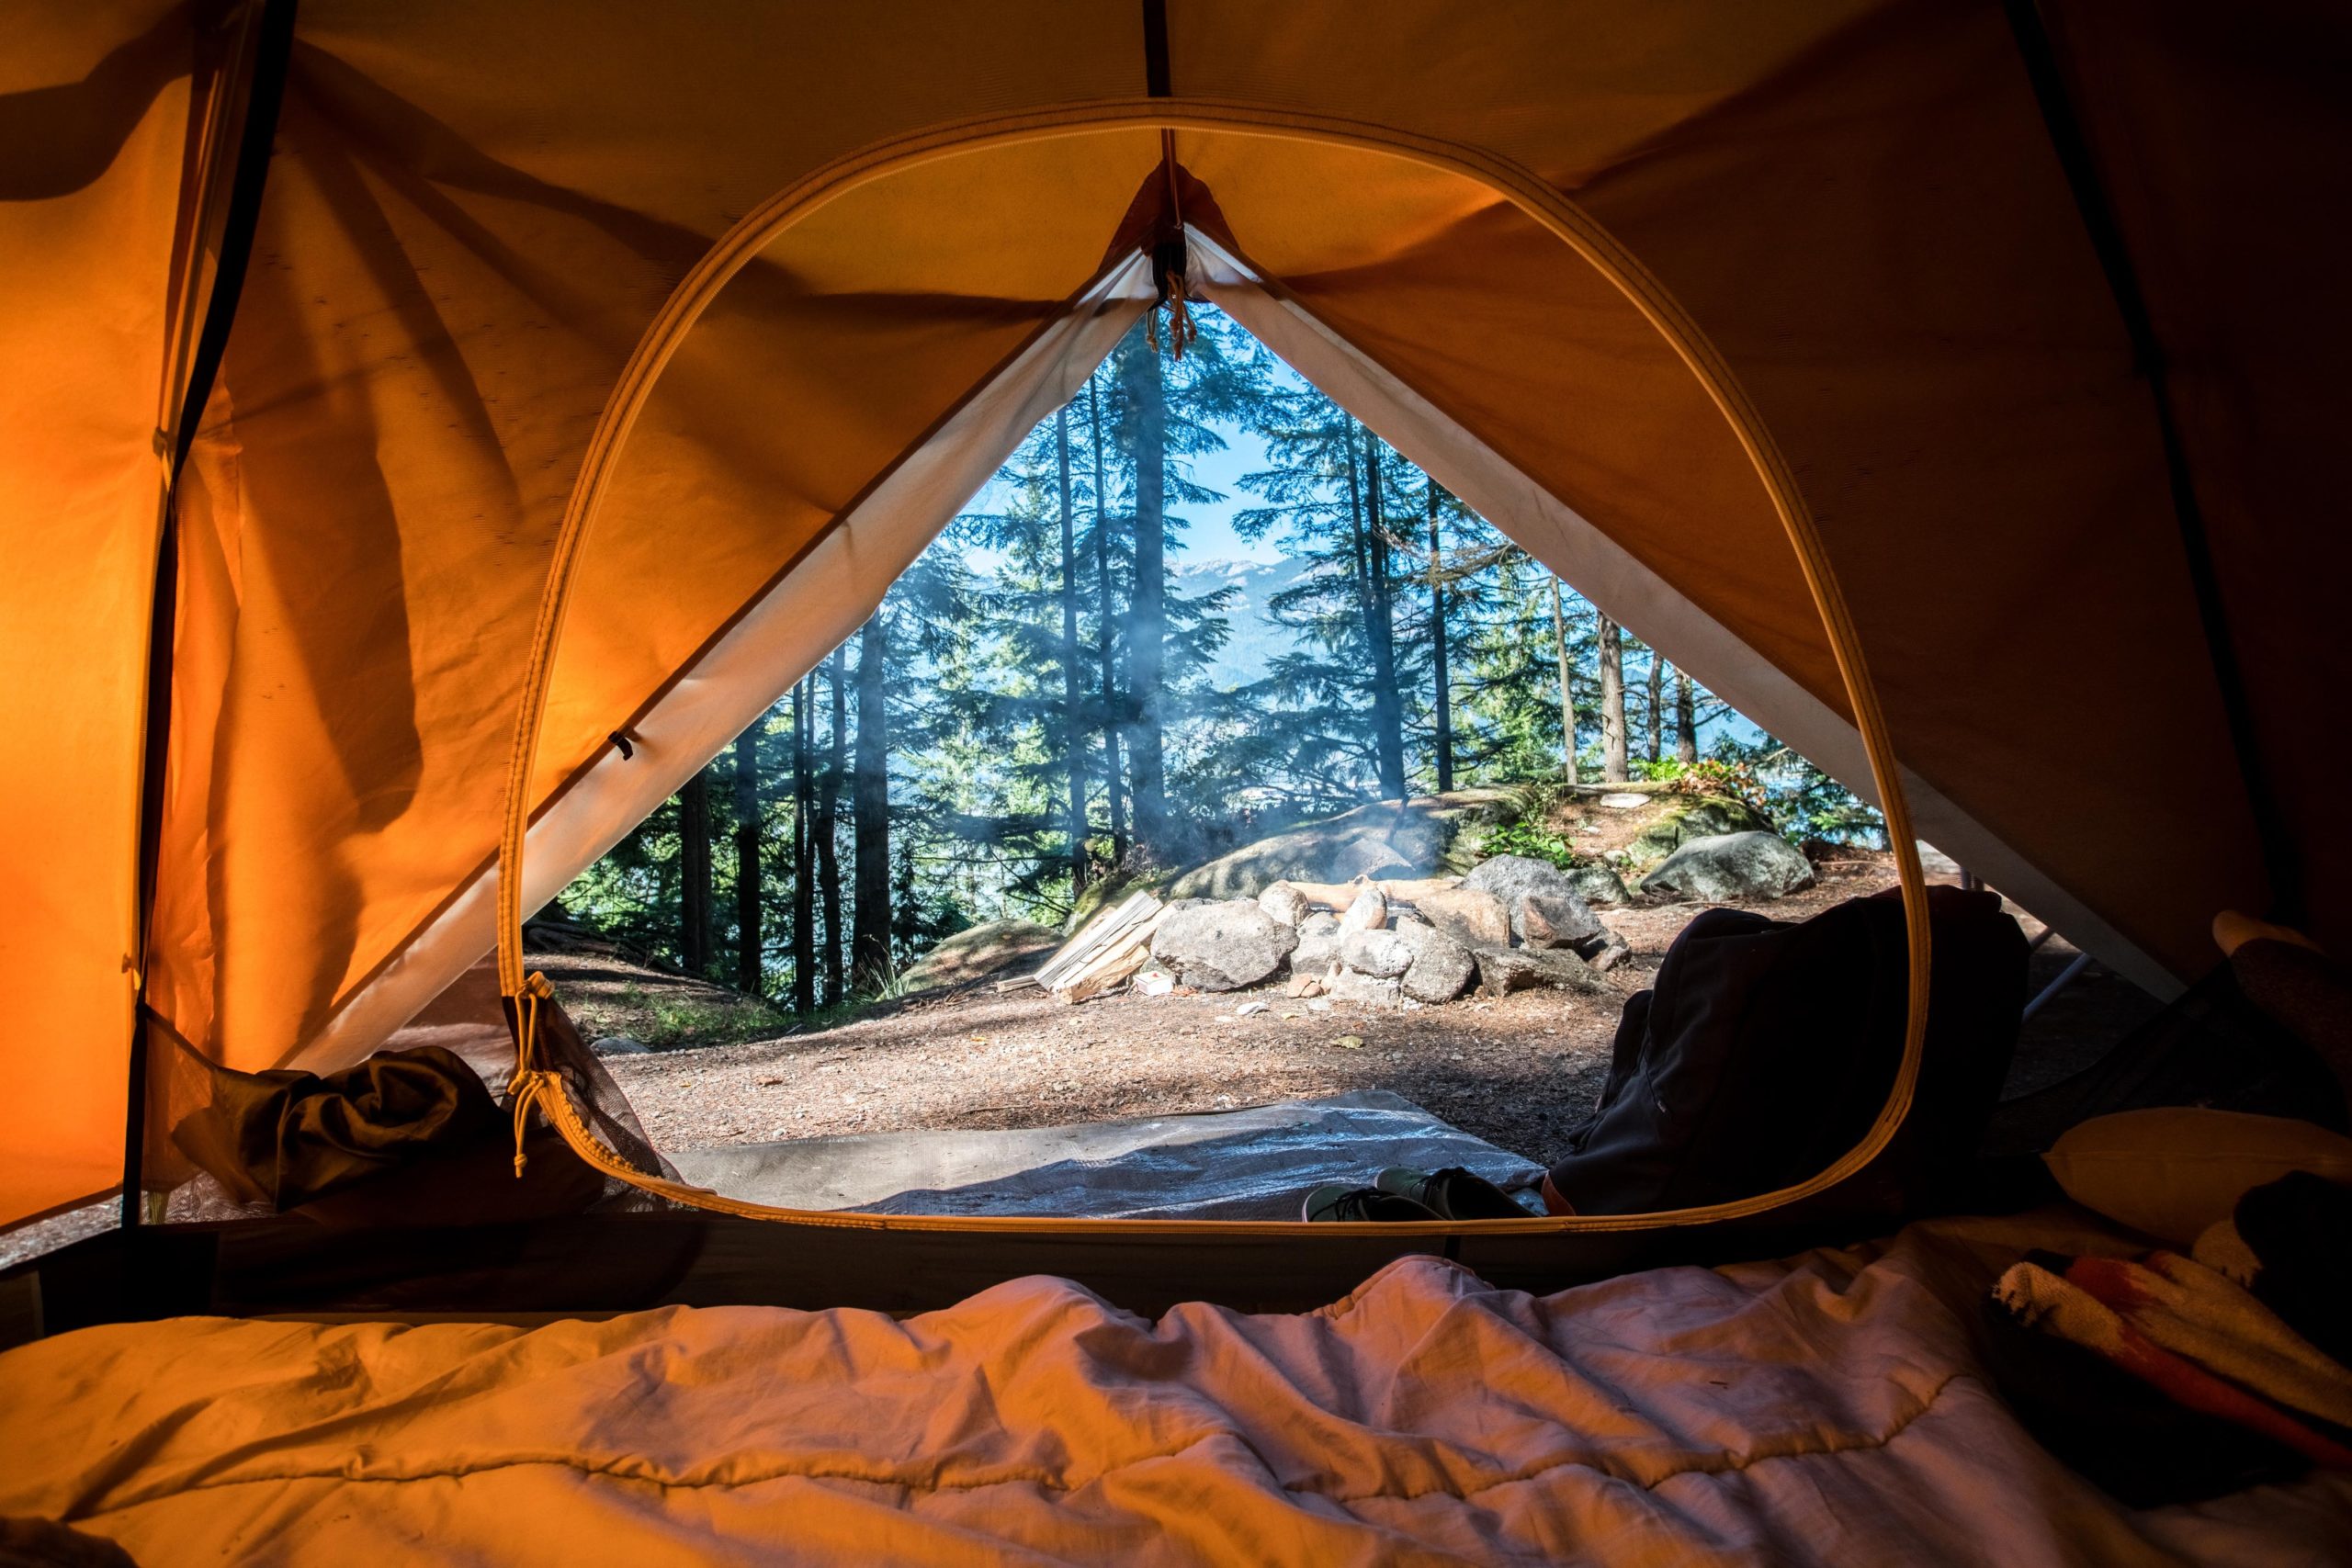 View inside a tent while camping in Glacier National Park